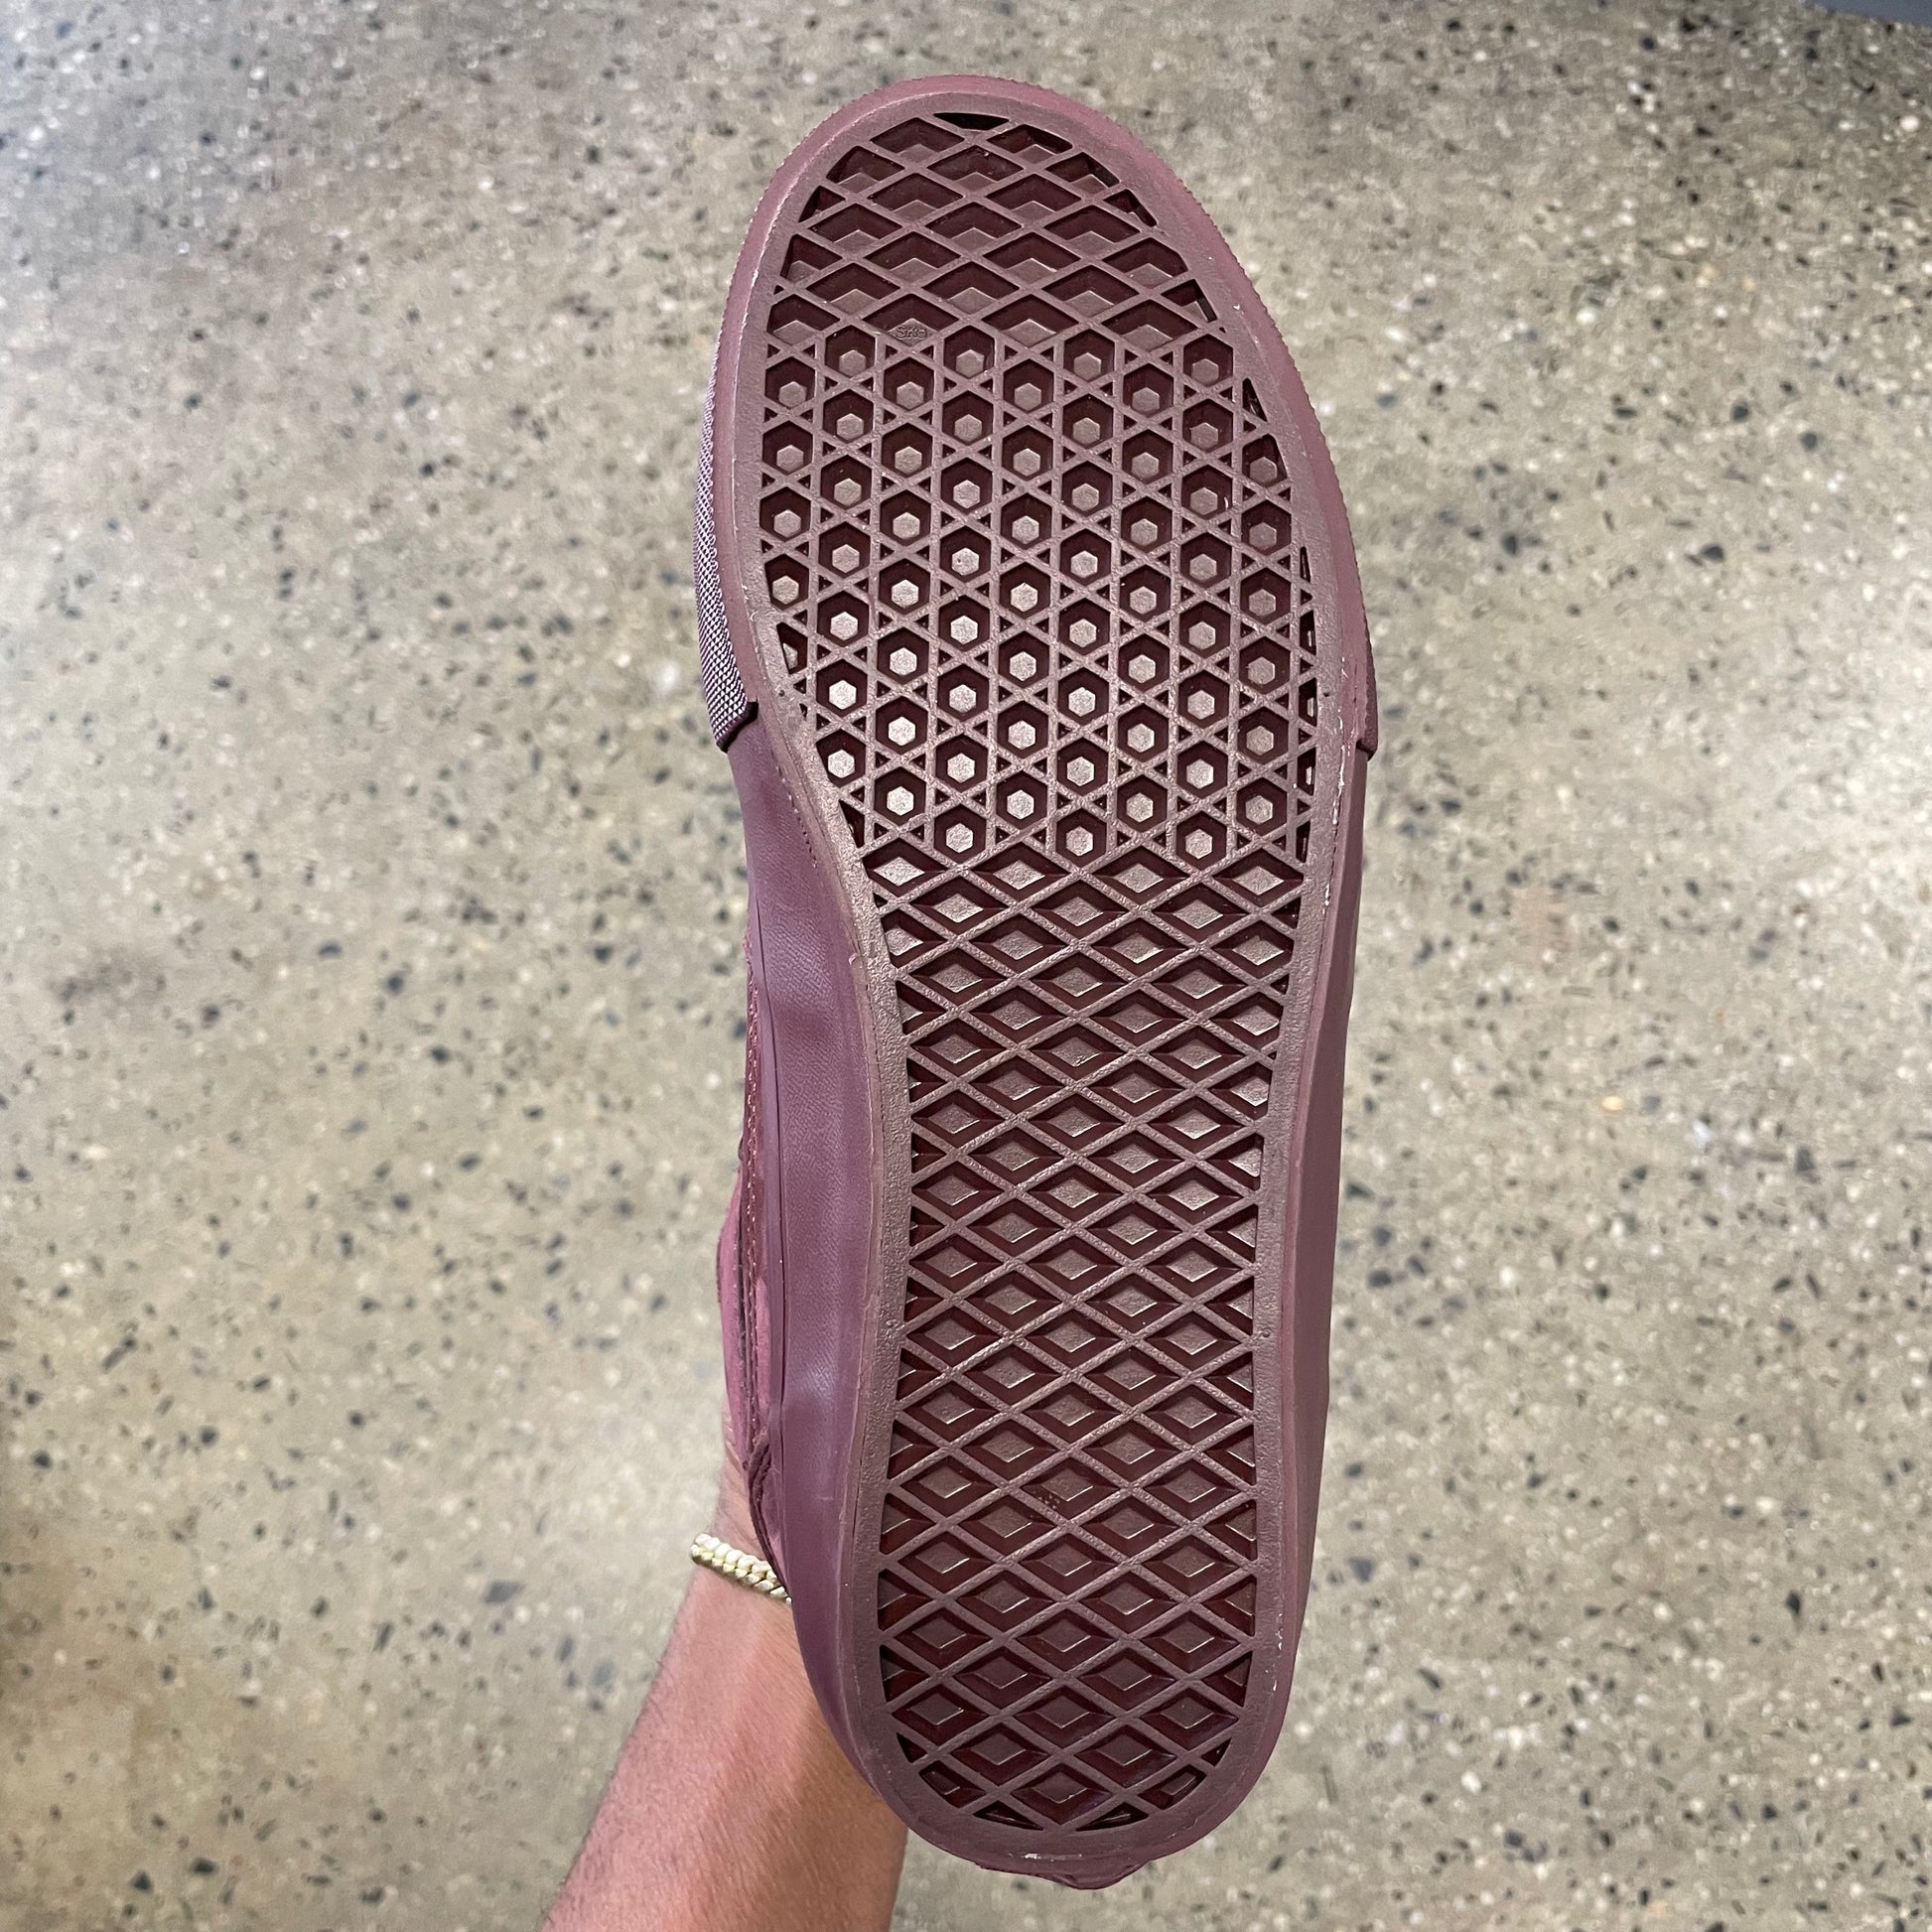 bottom view of brick red gum rubber outsole on skateboard shoe